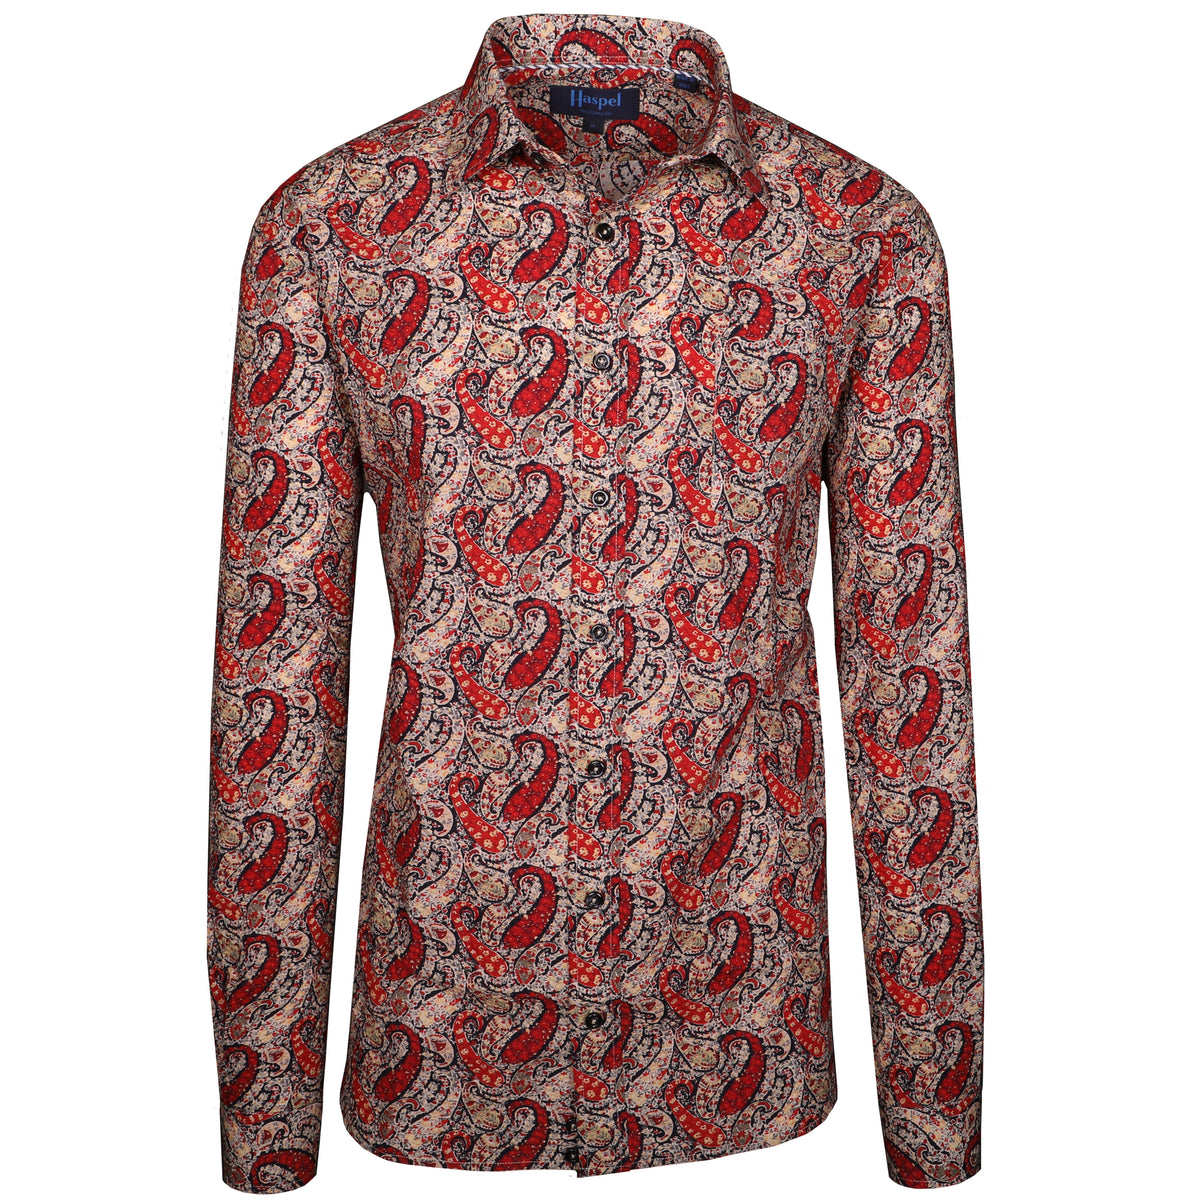 Mesmerizing paisley and the beguiling texture of our essential seersucker shirt are always ready to party. Wingman approved.  100% Cotton  •  Spread Collar with Removable Collar Stays  •  Long Sleeve  •  Chest Pocket  •  Machine Washable  •  Made in Italy